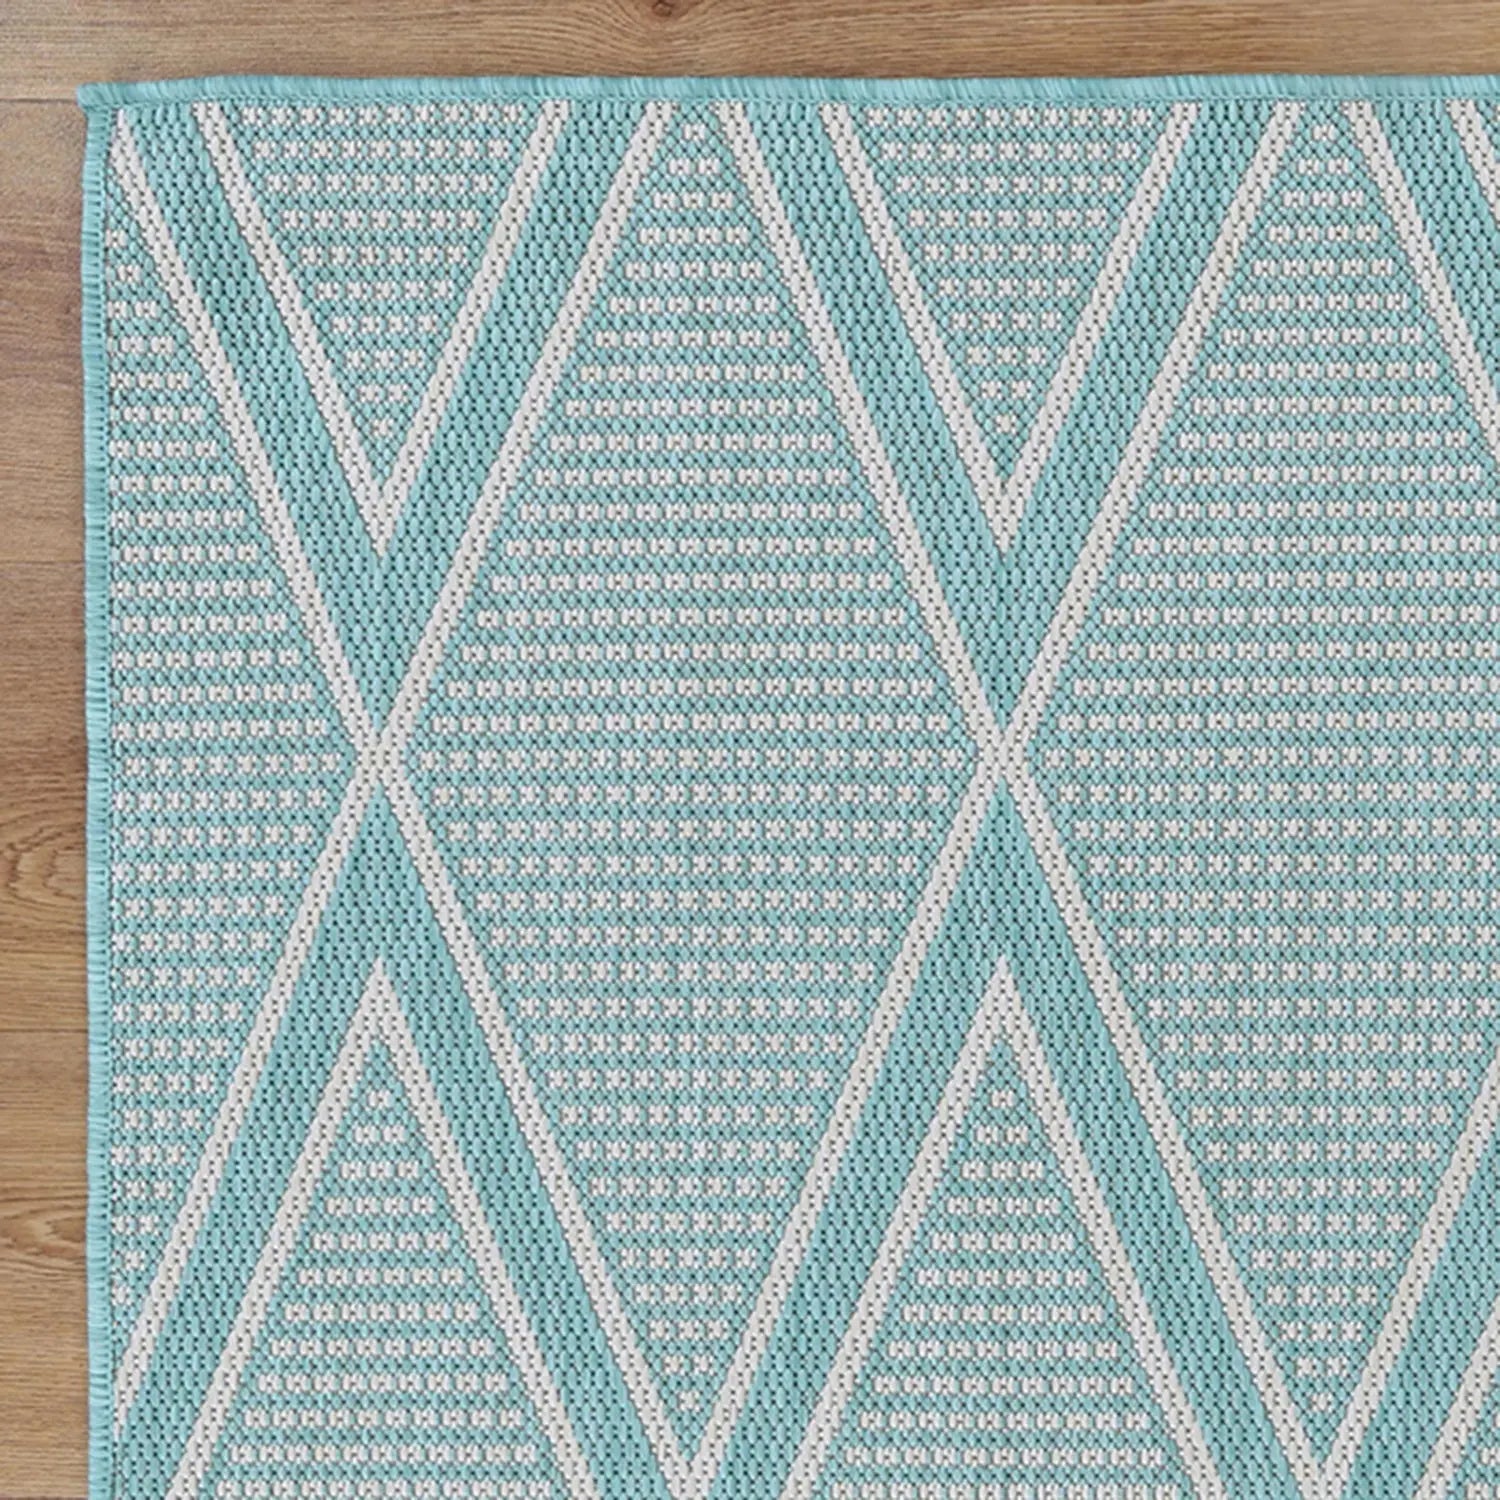 Elements Indoor/Outdoor Turquoise Diamond Rug - Rugs - Rugs a Million